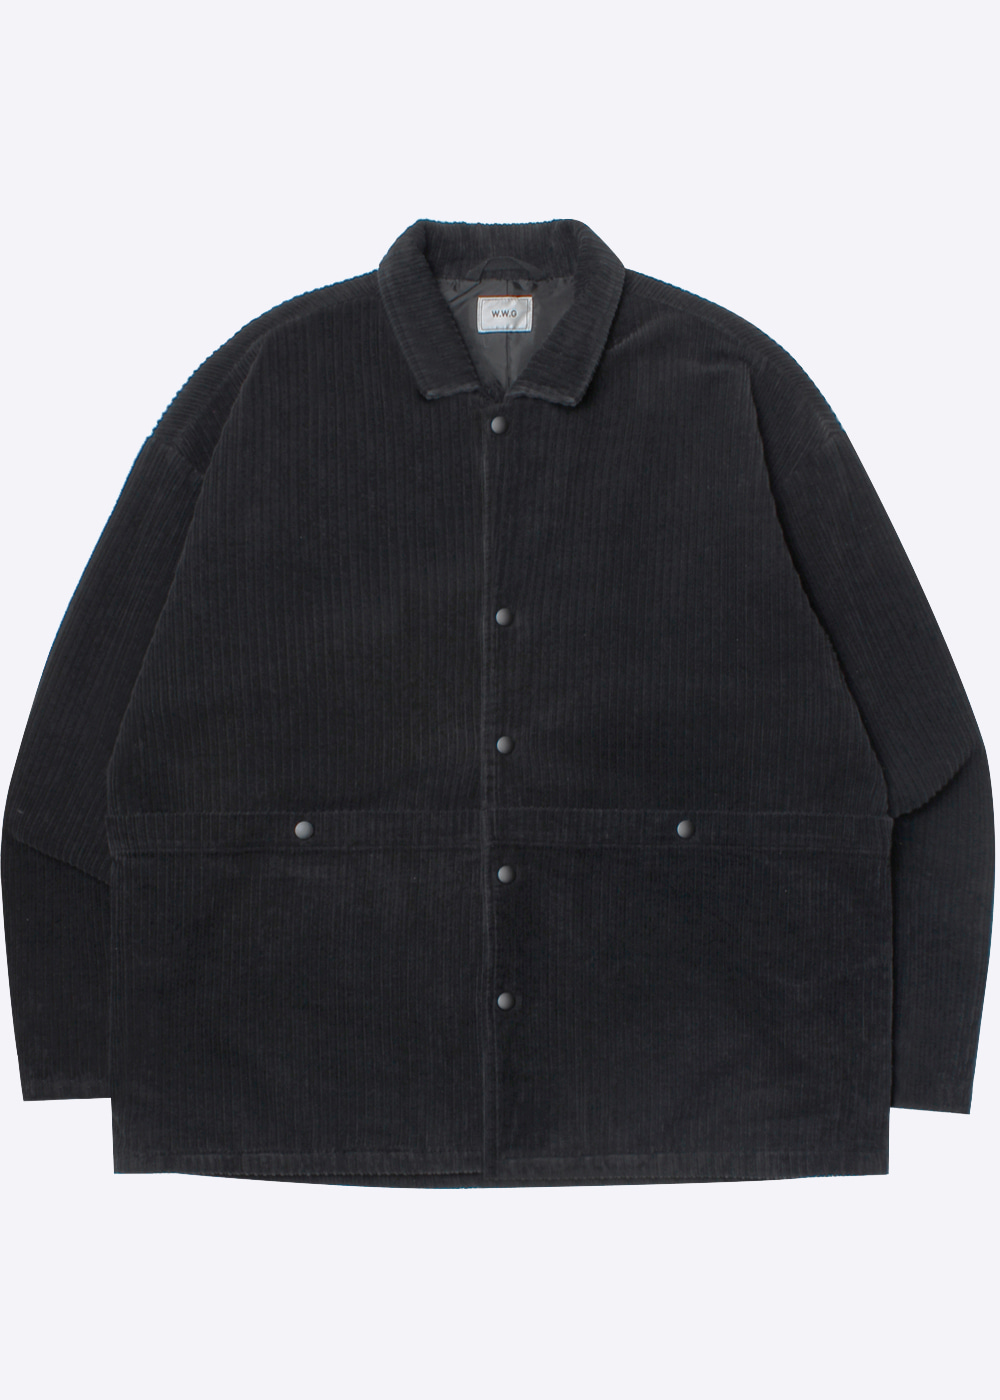 WHO’S WHO GALLERY’over fit’big pocket corduroy jacket